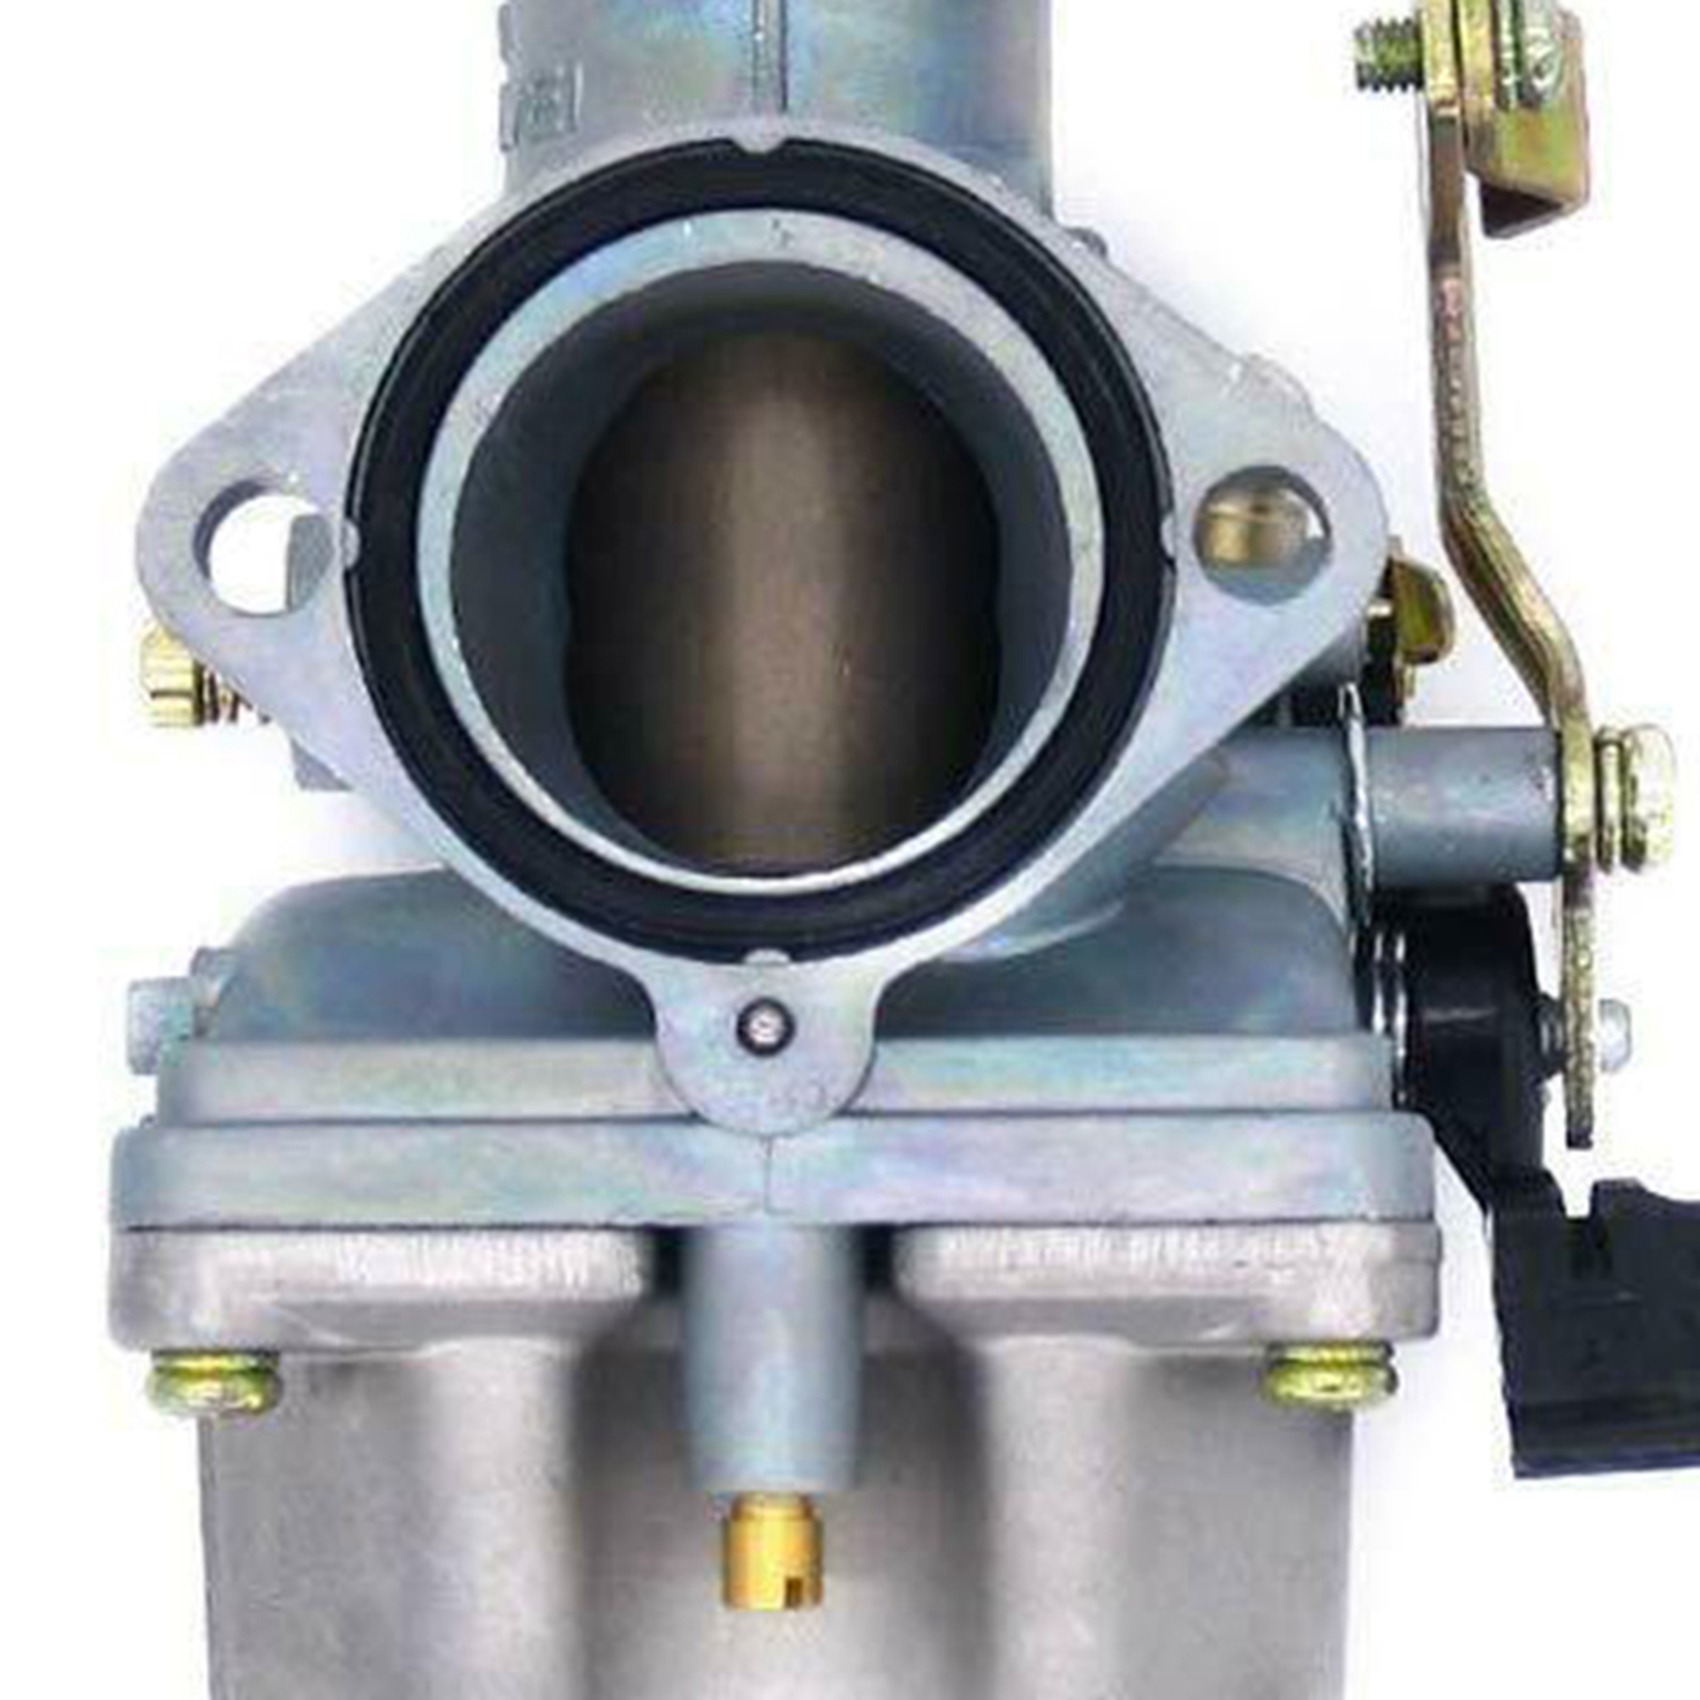 PZ30 Carburetor is Suitable for 200 250 300 Cc OffRoad Vehicles, with Manual Operation Chain ATV Scooter Light Engine